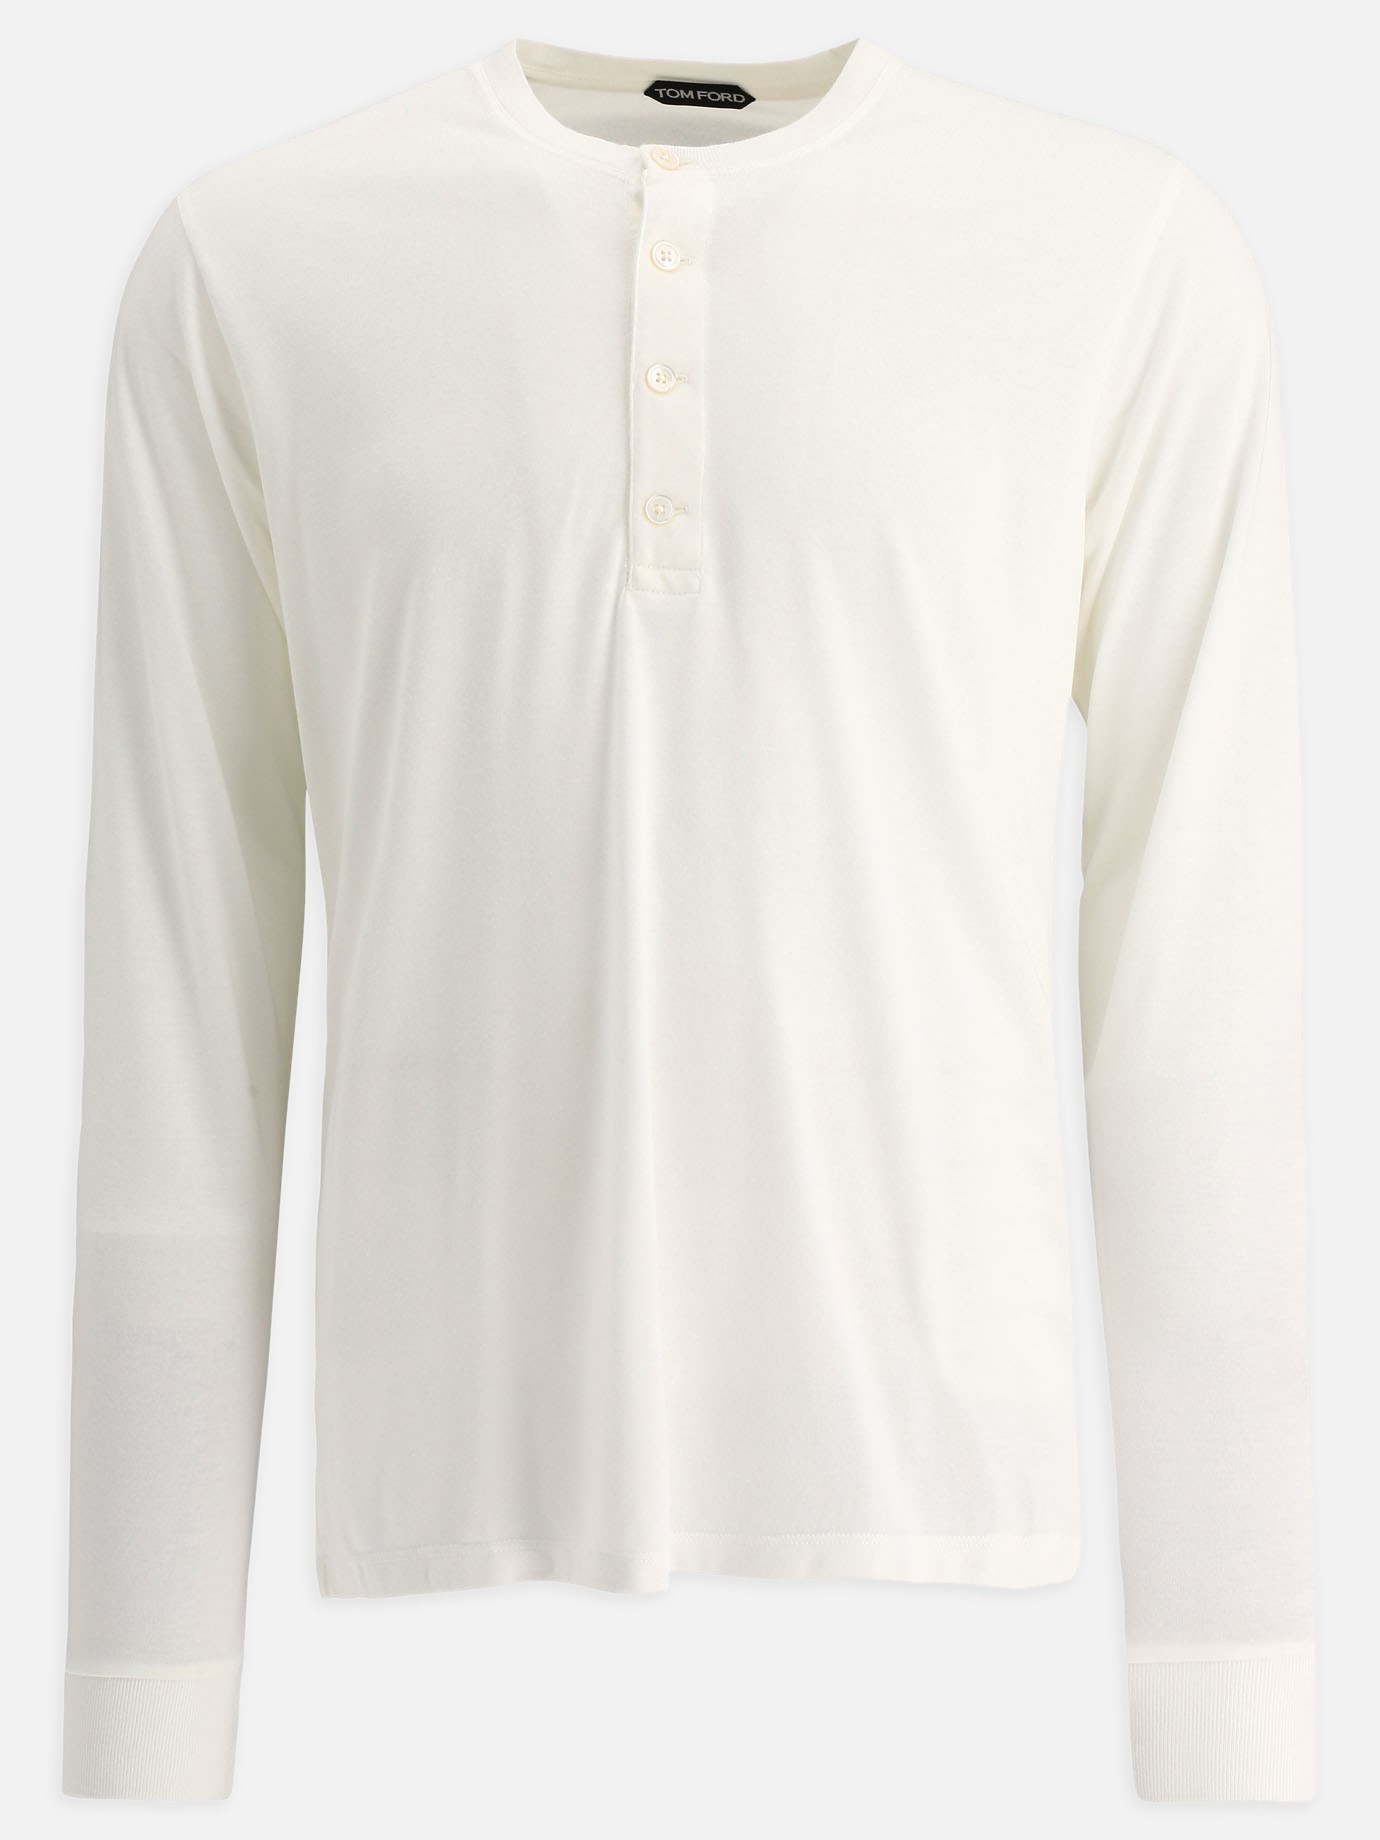  Henley  t-shirtby Tom Ford - 0